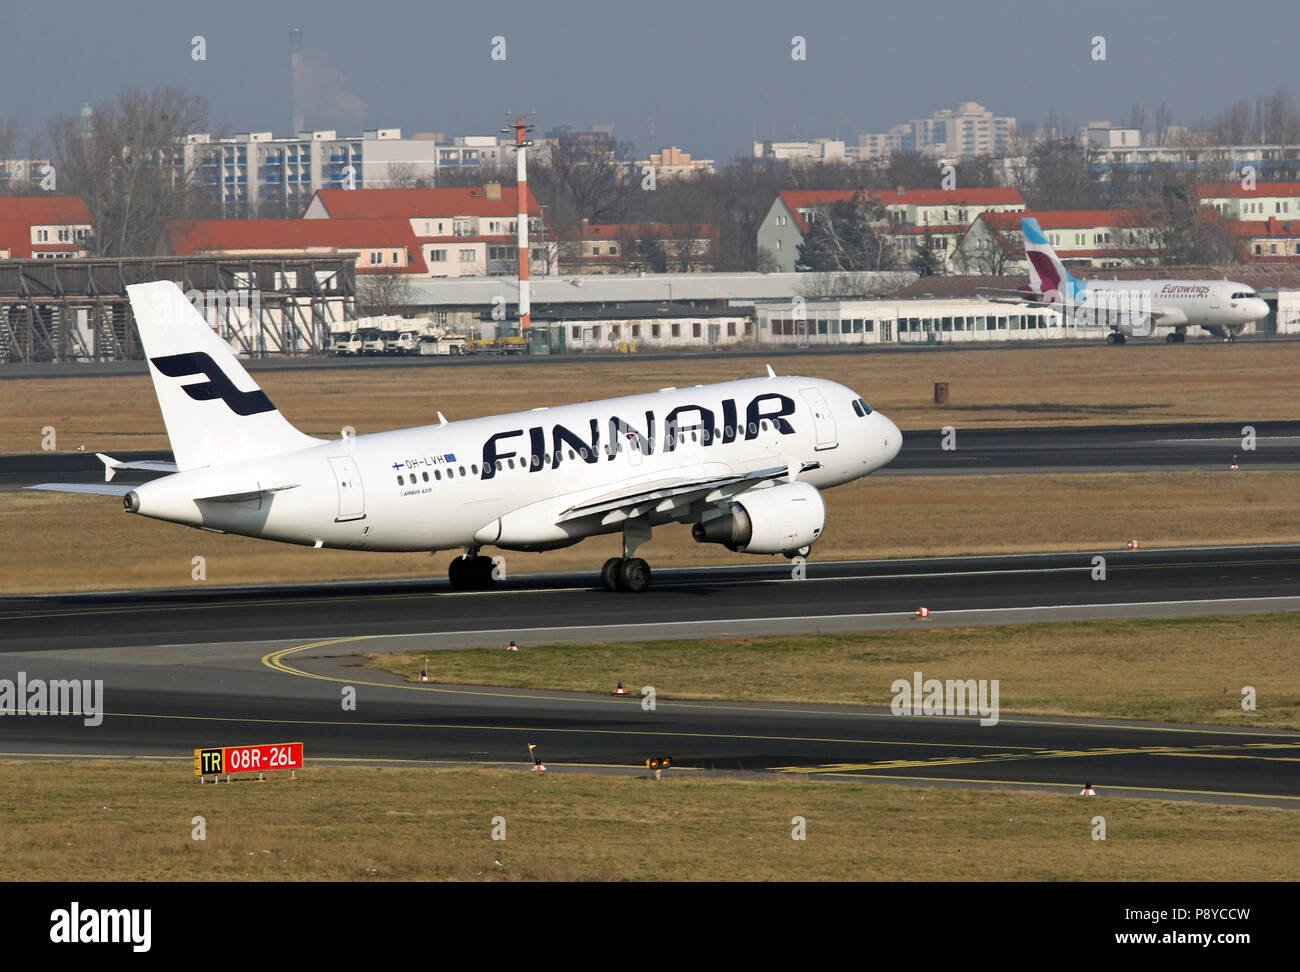 Berlin, Germany, Airbus A319 of the airline Finnair at the take-off at the airport Berlin-Tegel Stock Photo